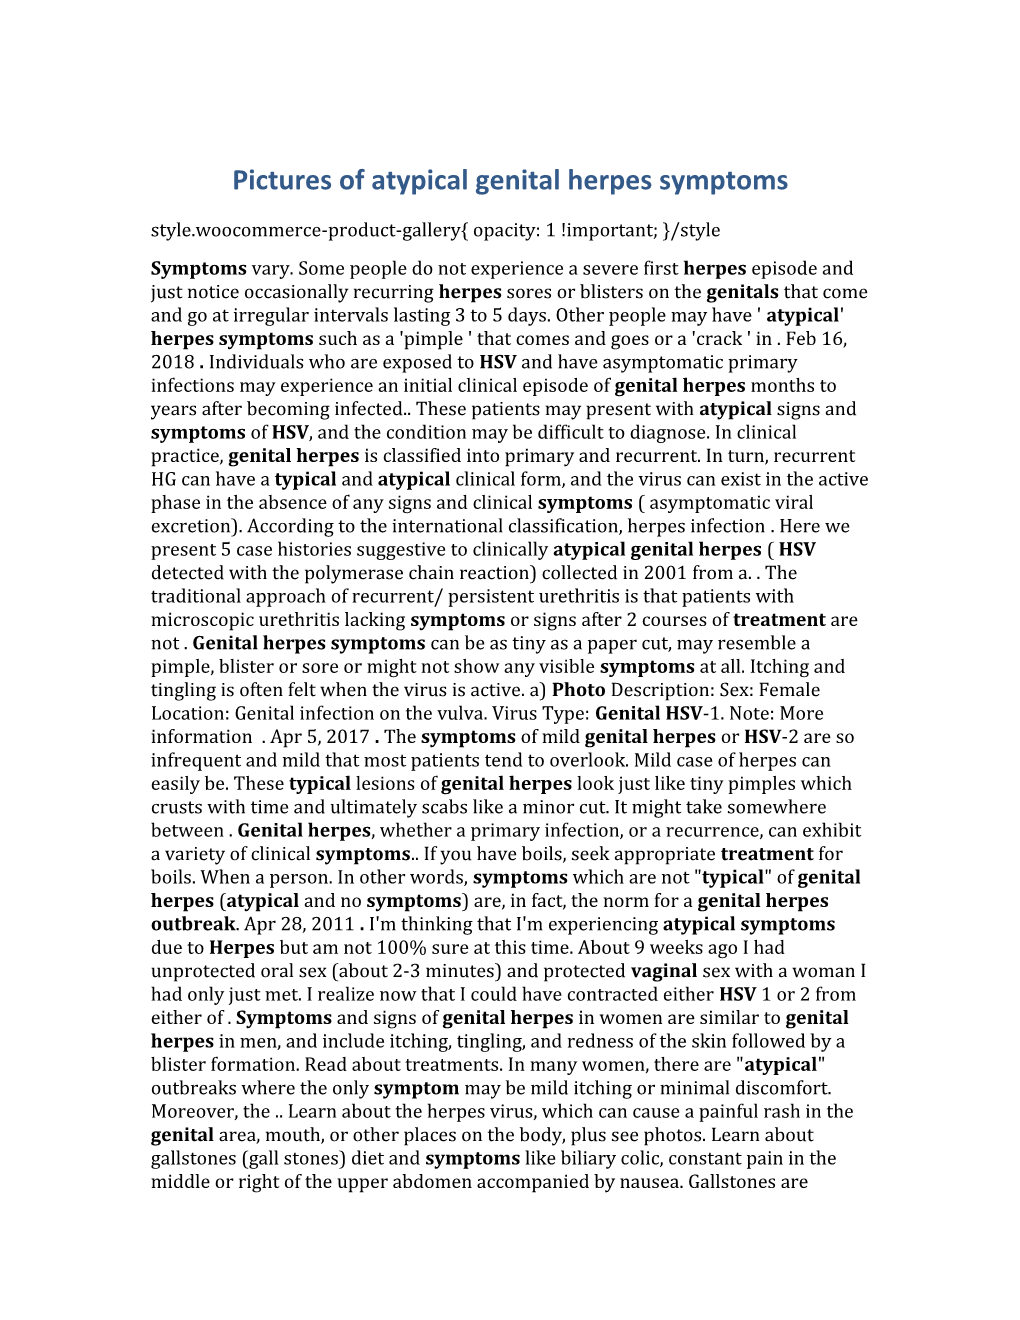 Pictures of Atypical Genital Herpes Symptoms